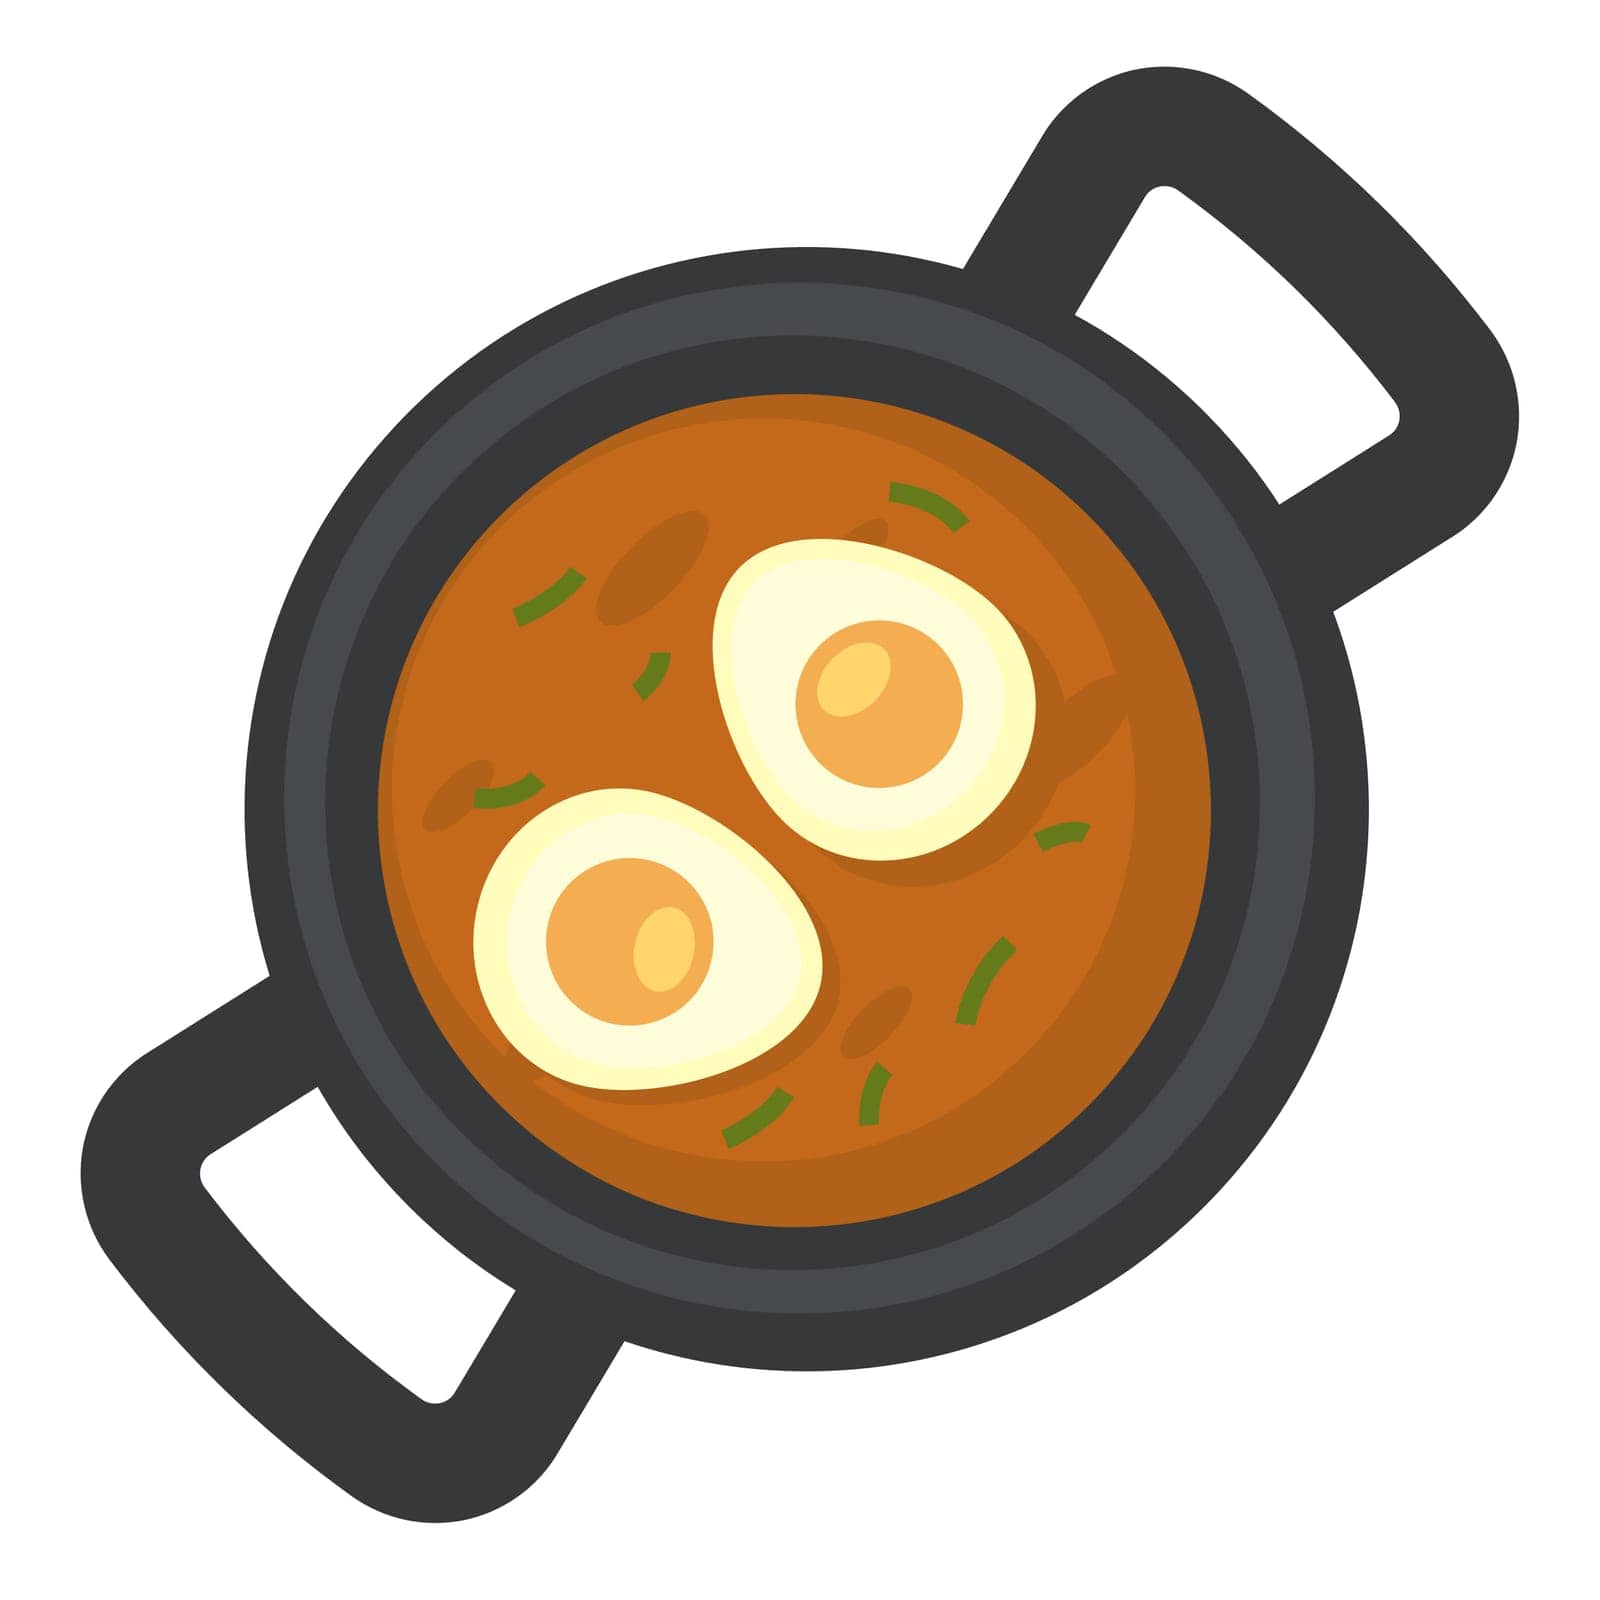 Traditional cuisine of turkey and arabic countries. Isolated icon of pan with omelet, fried menemen. Tasty dish made of veggies tomatoes and greenery. Recipe for restaurant menu. Vector in flat style